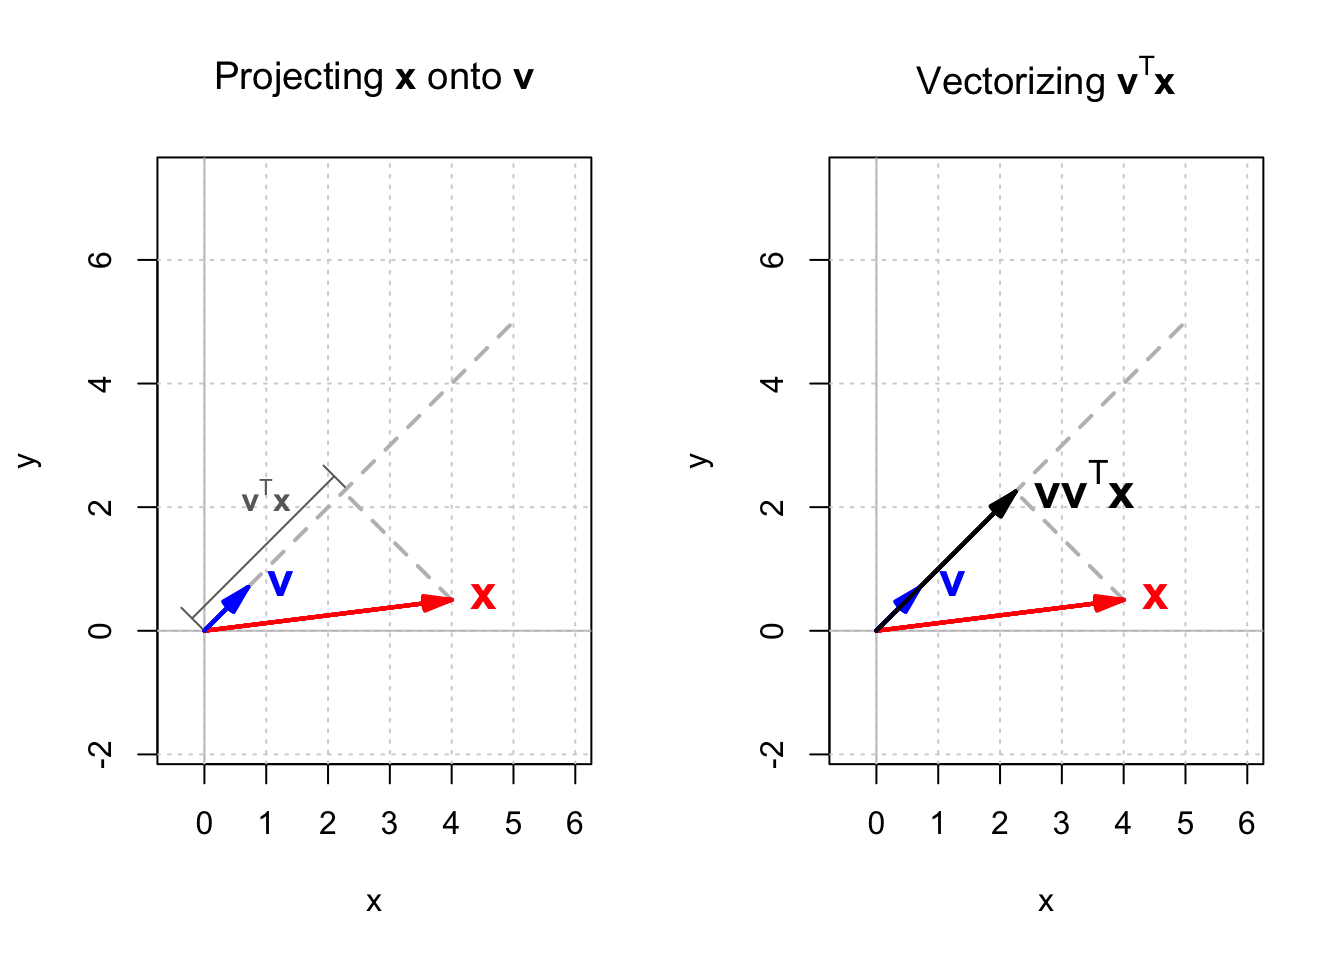 eigendecomposition: projecting and scaling (left) then vectorizing (right).